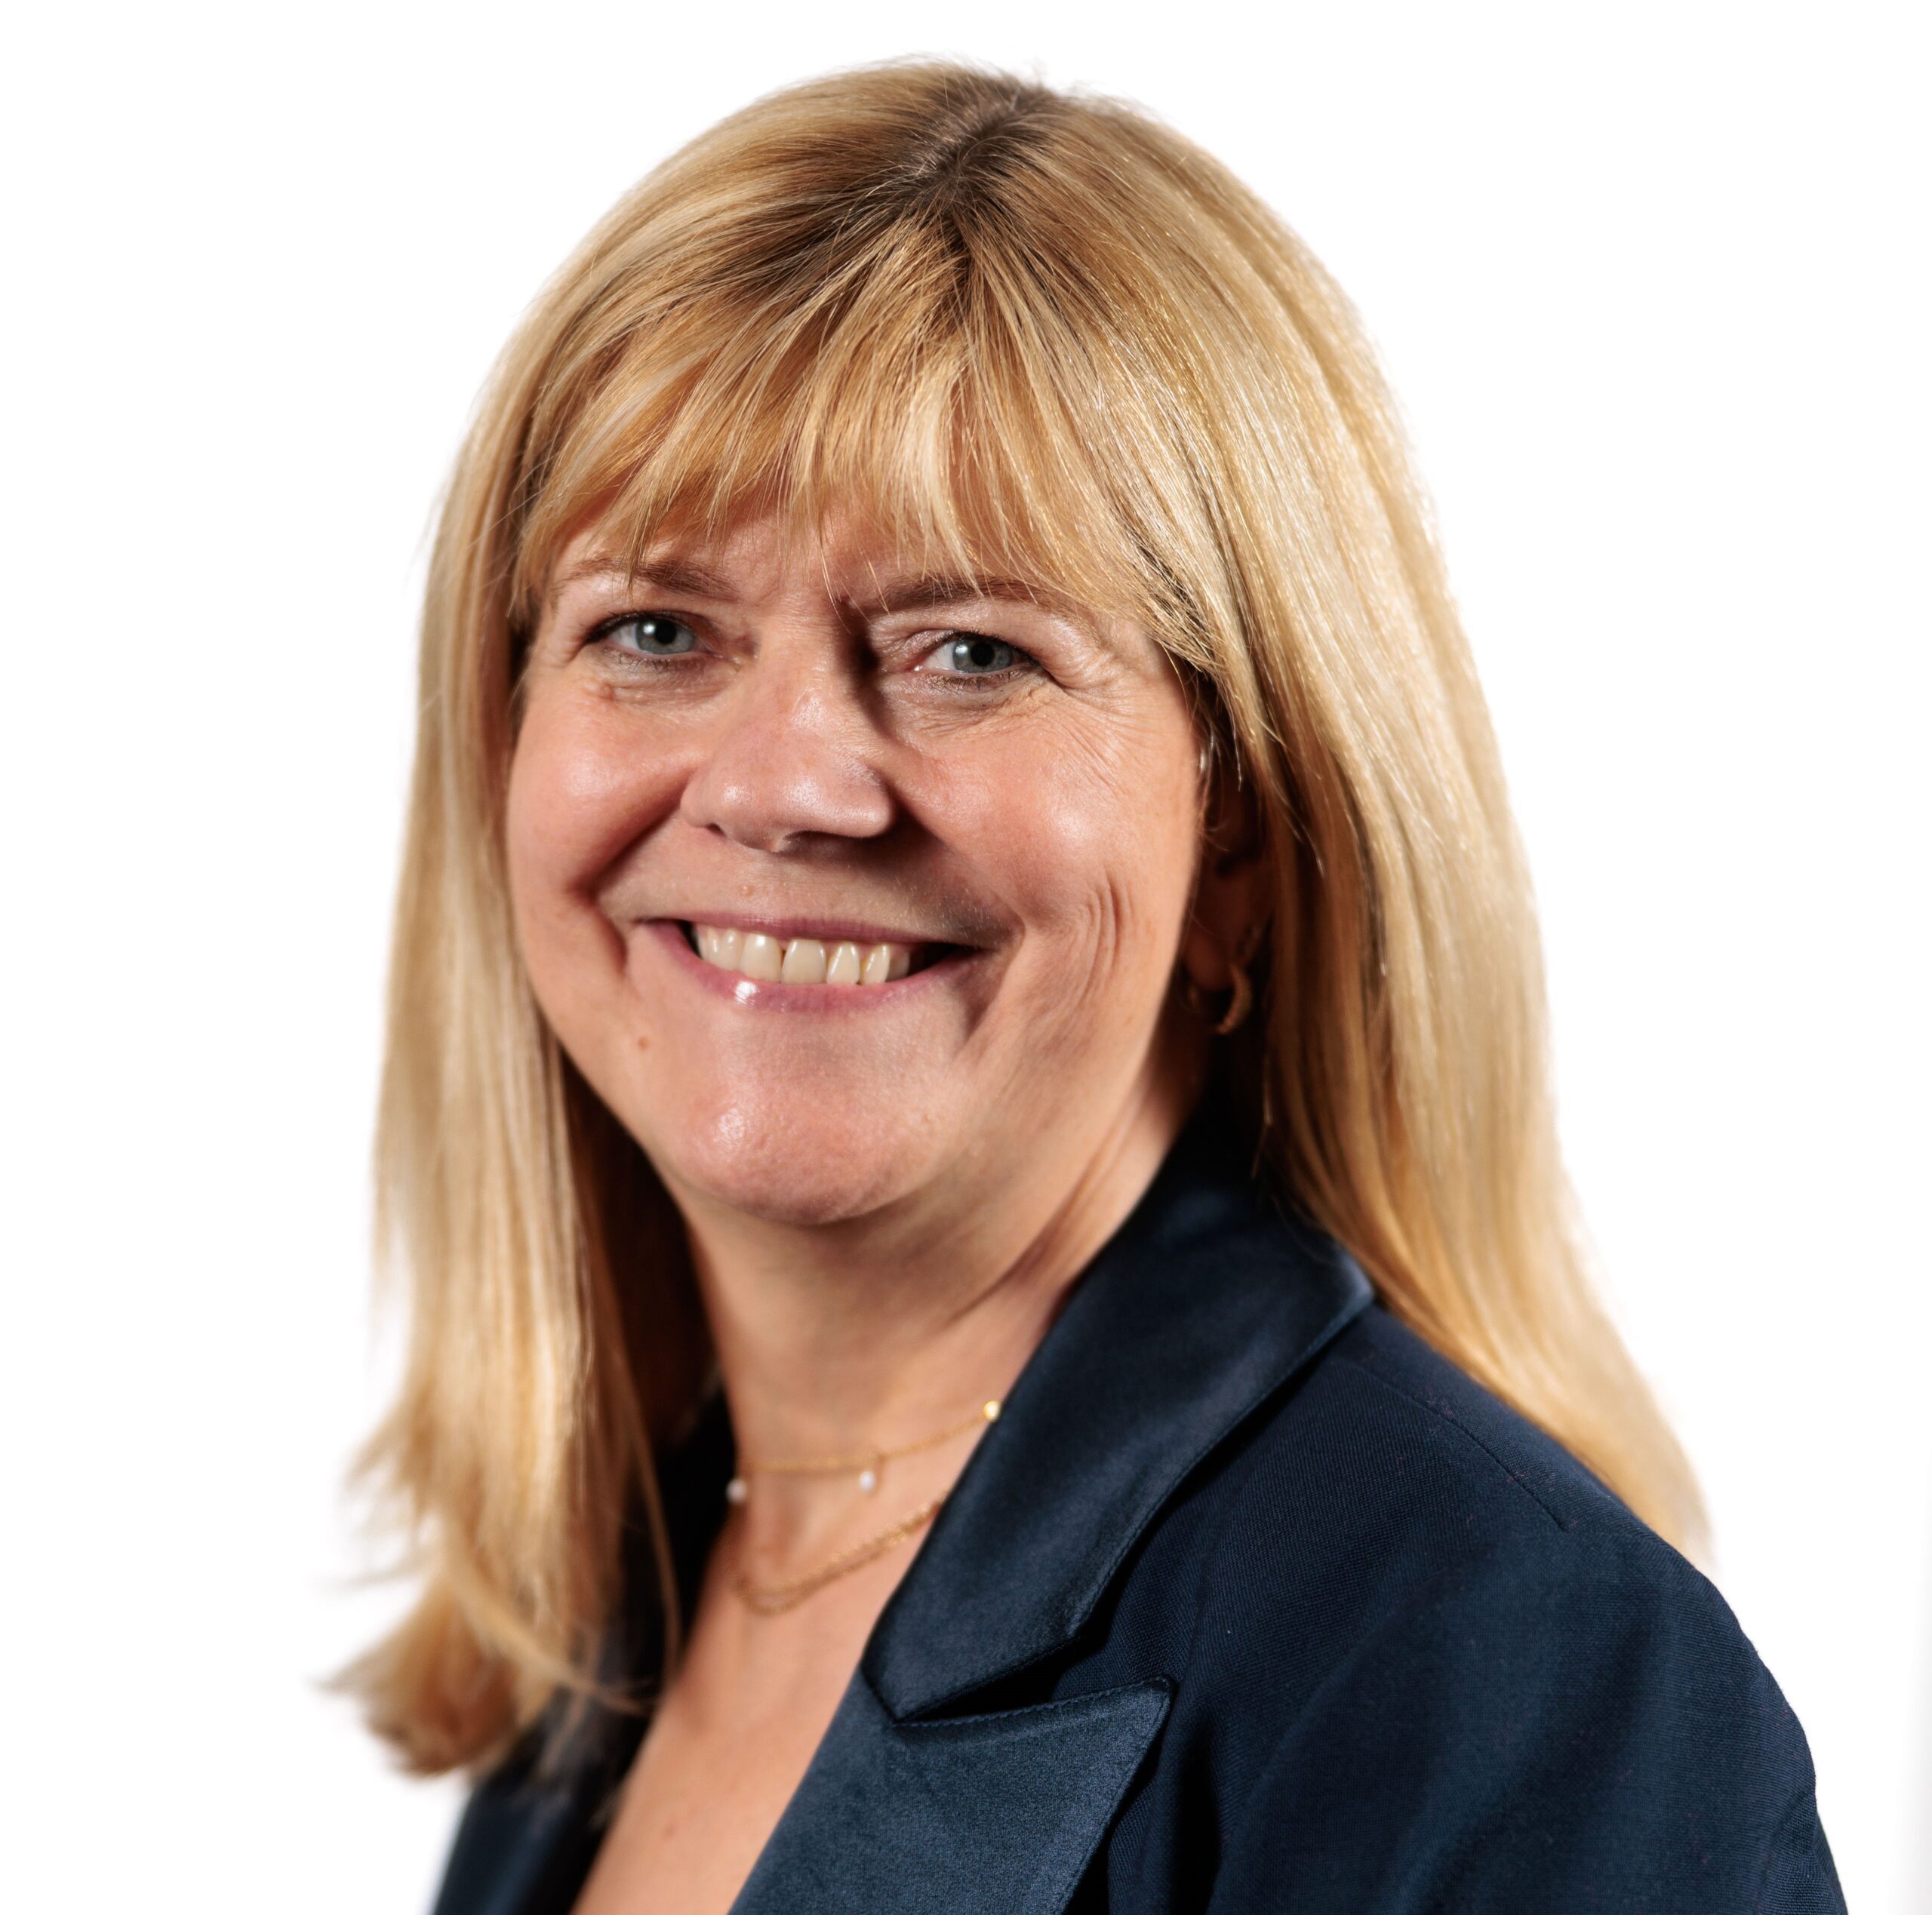 Career Connect CEO Sheila Clark appointed Vice-Chair of Careers England